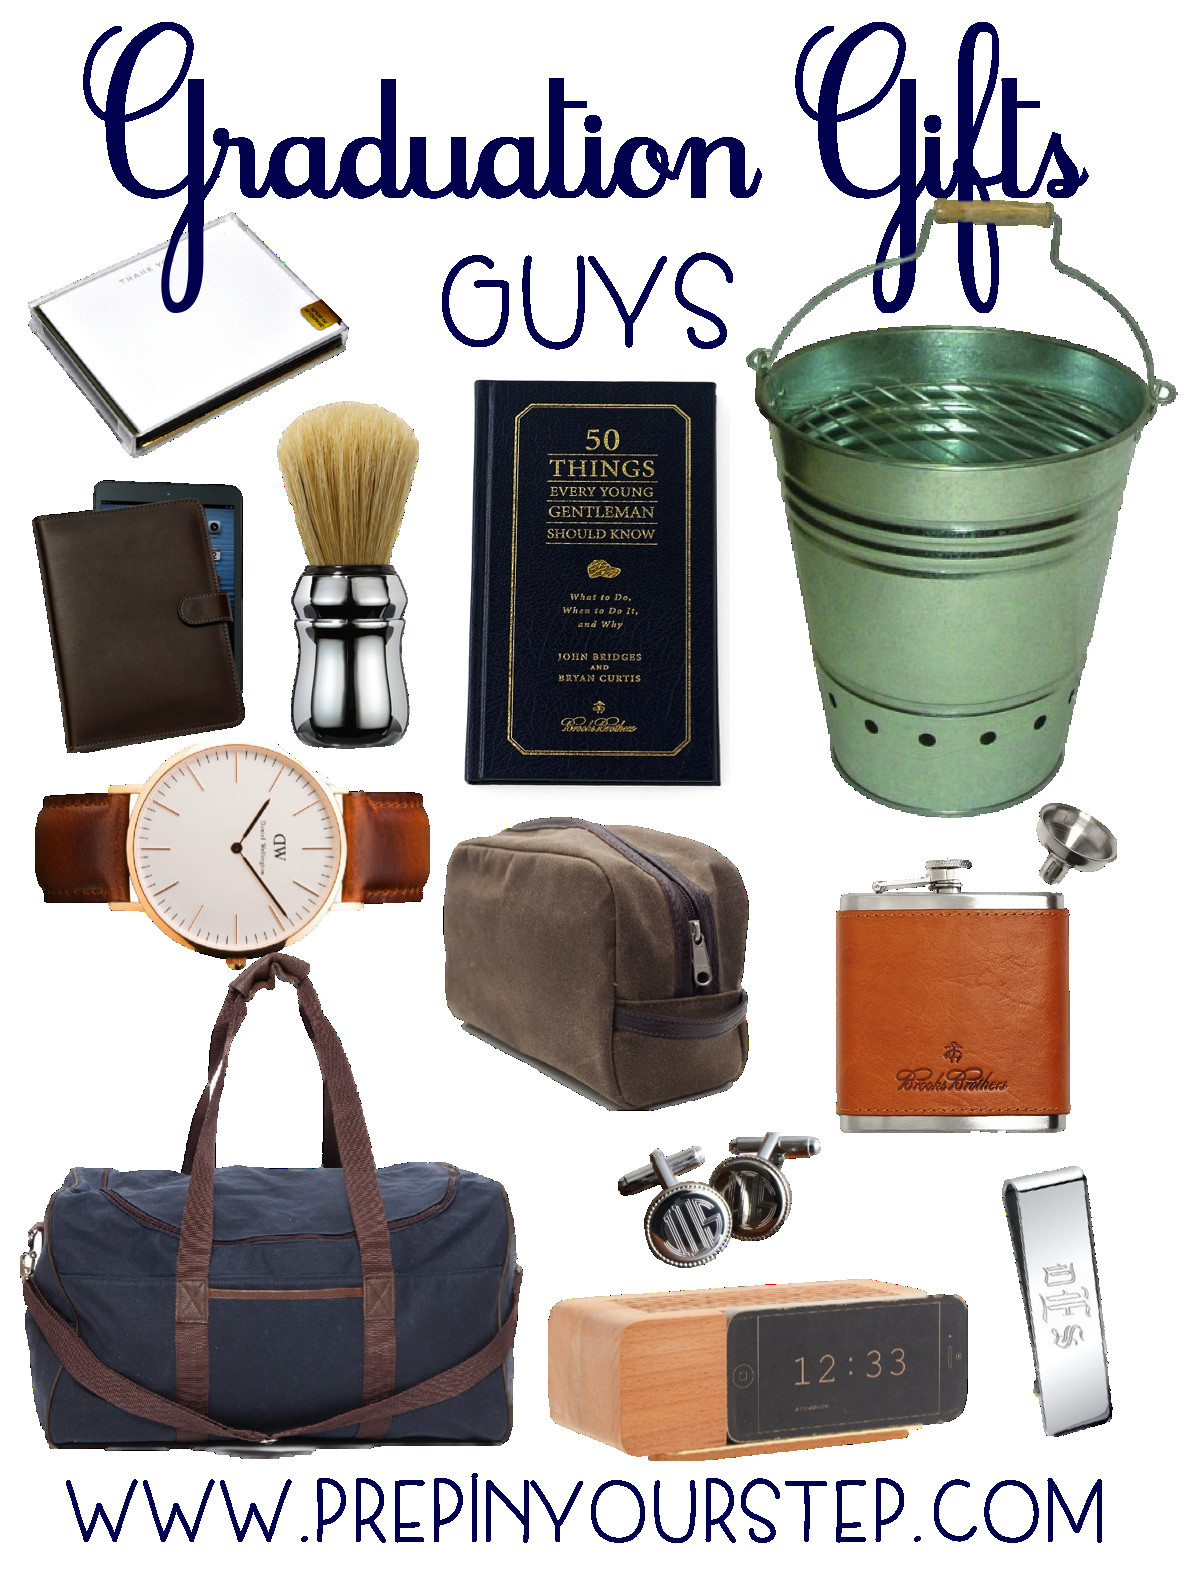 Graduation Gift Ideas For Men
 Graduation Gift Ideas Guys & Girls Prep In Your Step